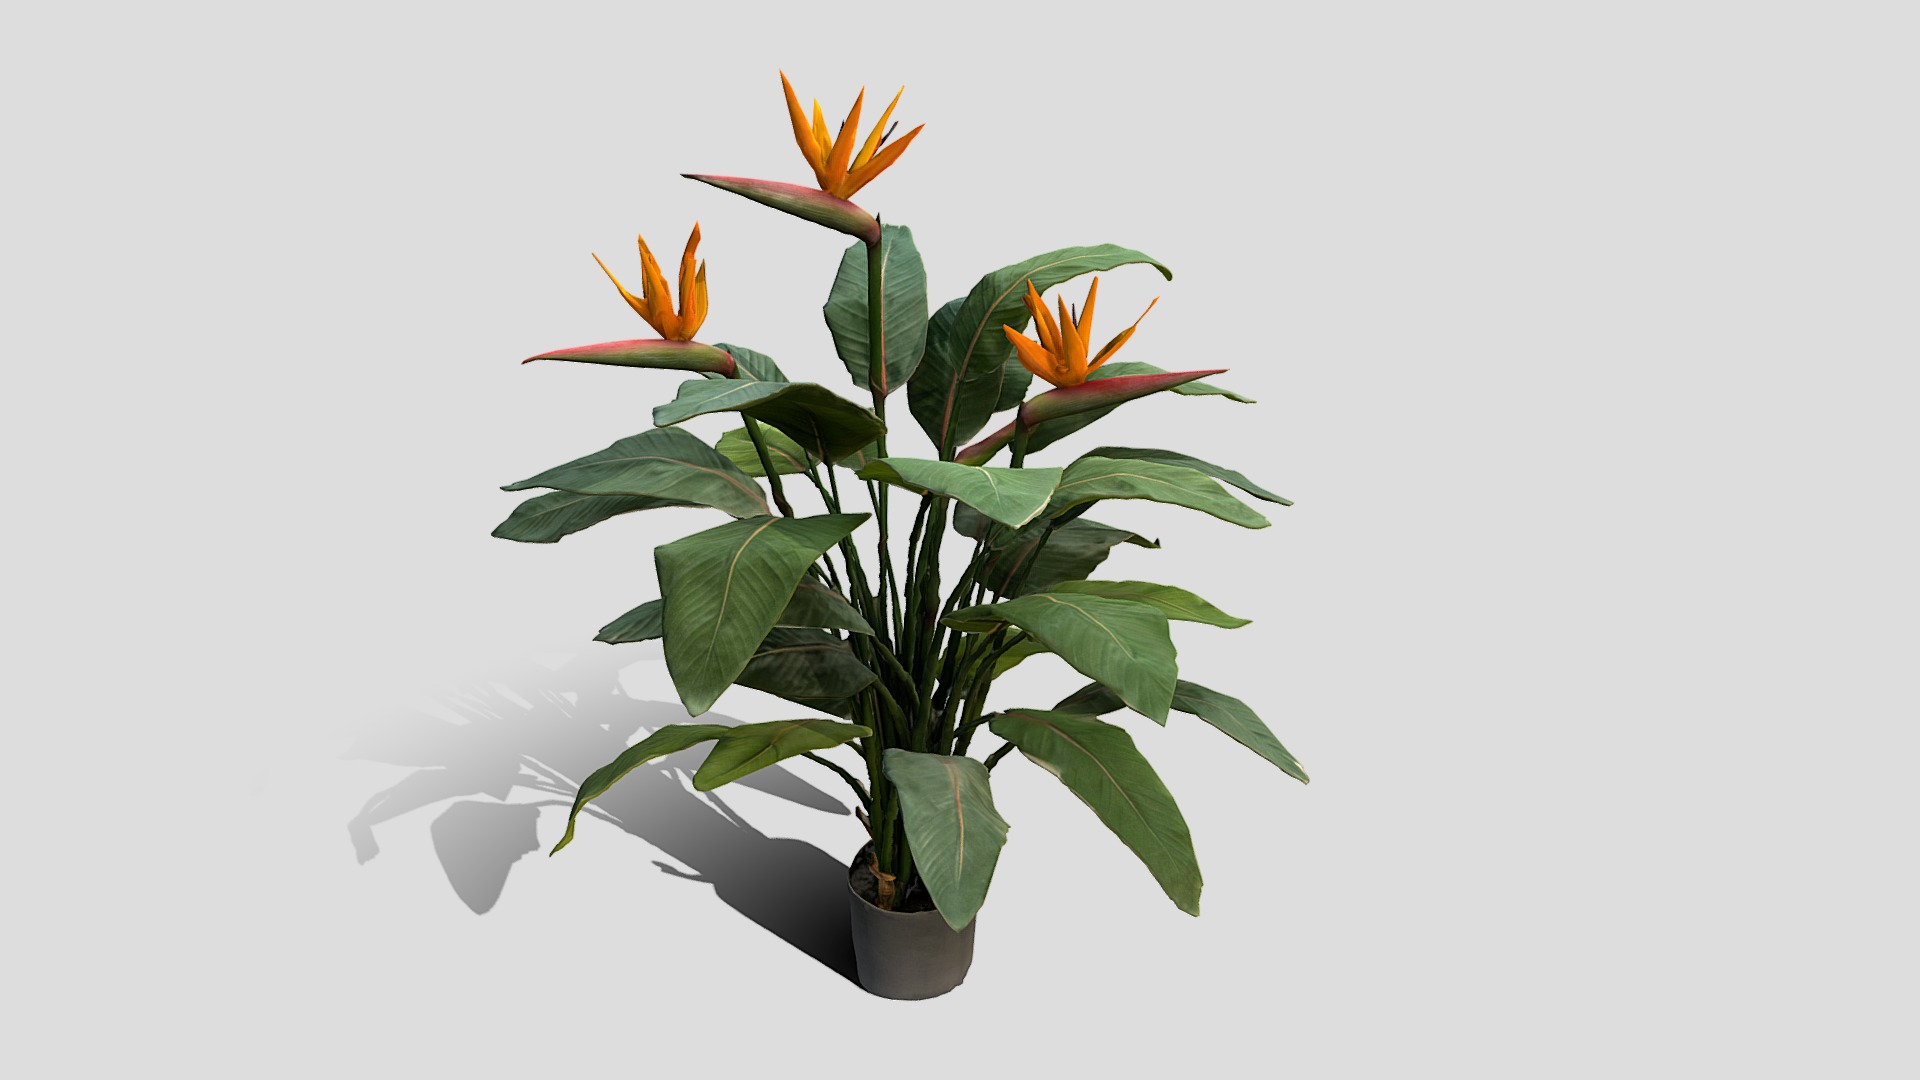 3D model 000051_150512 - This is a 3D model of the 000051_150512. The 3D model is about a plant with orange flowers.